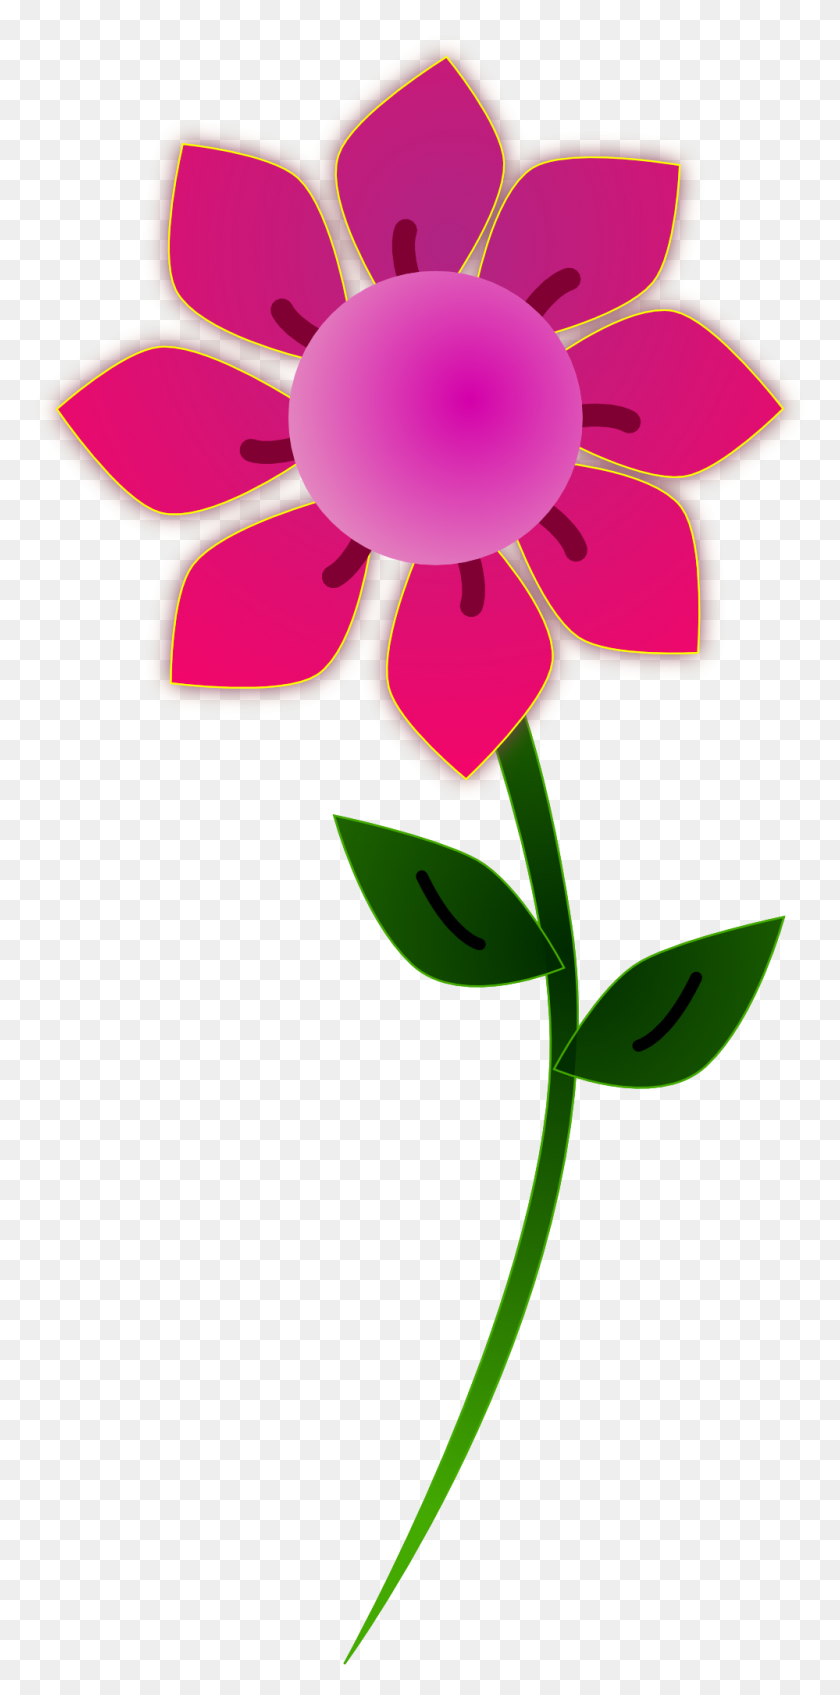 999x2095 Free Flower Clip Art Graphics Of Flowers For Layouts Image - Apple Border Clipart